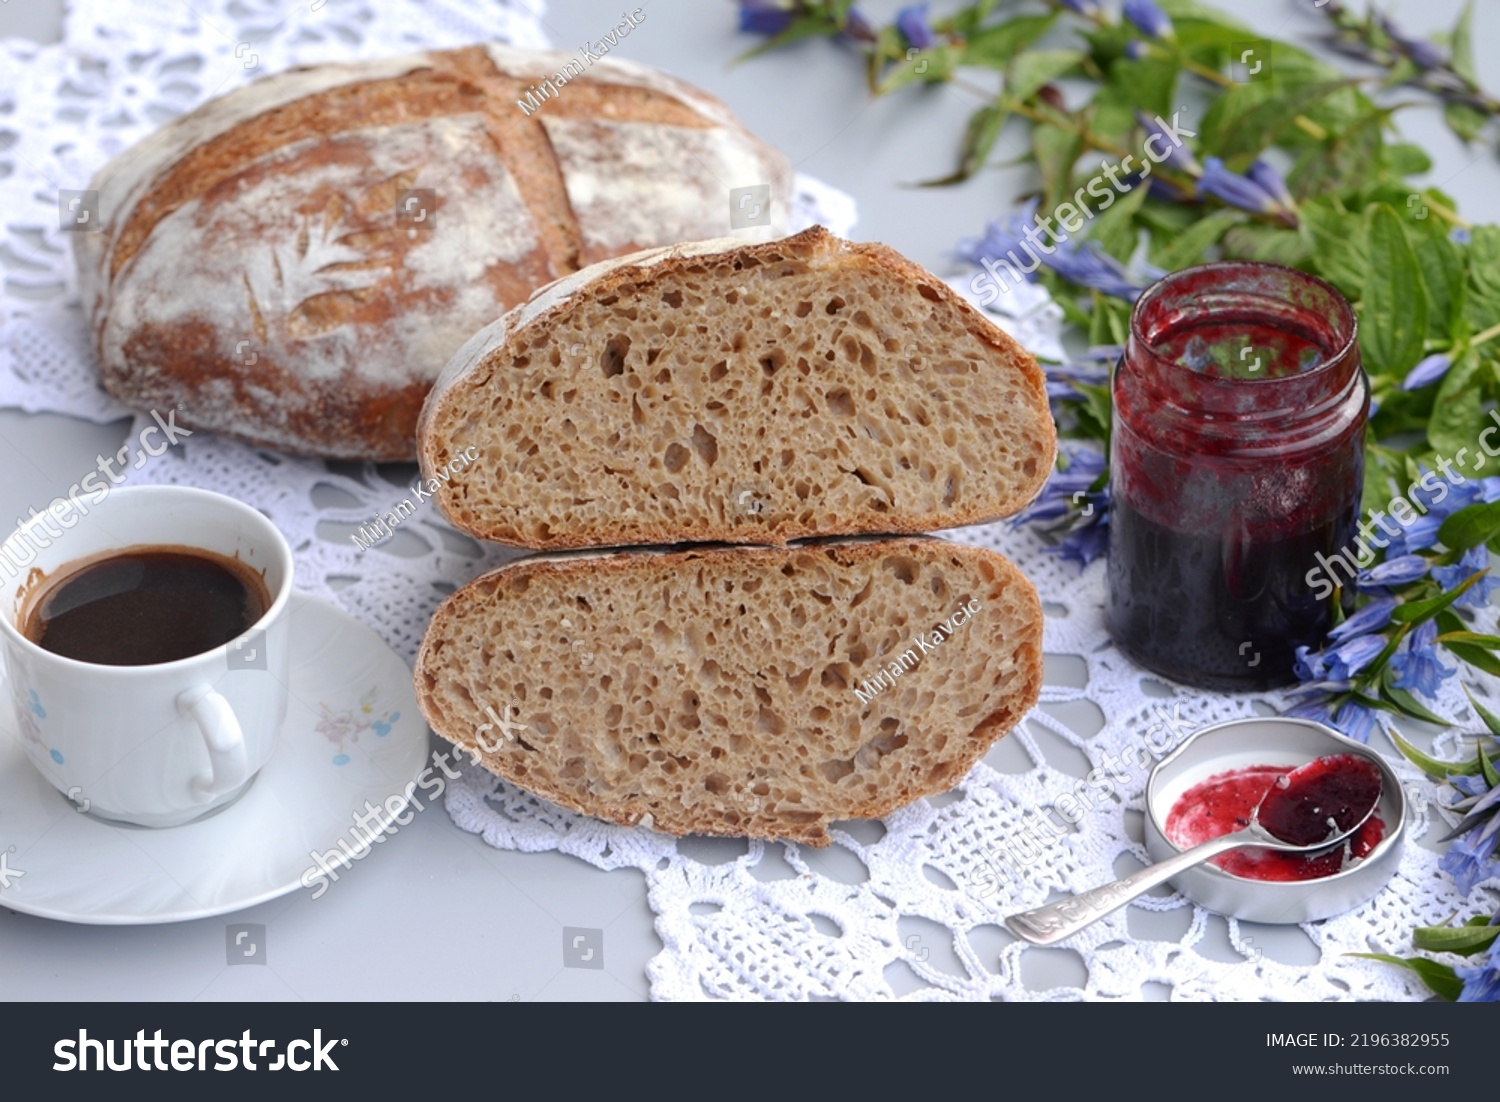 Bread texture of sliced dark bread loaf, cup of coffee and jam. Home baked wheat bread with rye flour and sesame seeds; two loafs of crusty sourdough wheat bread with rye flour; one loaf cut in half. #2196382955